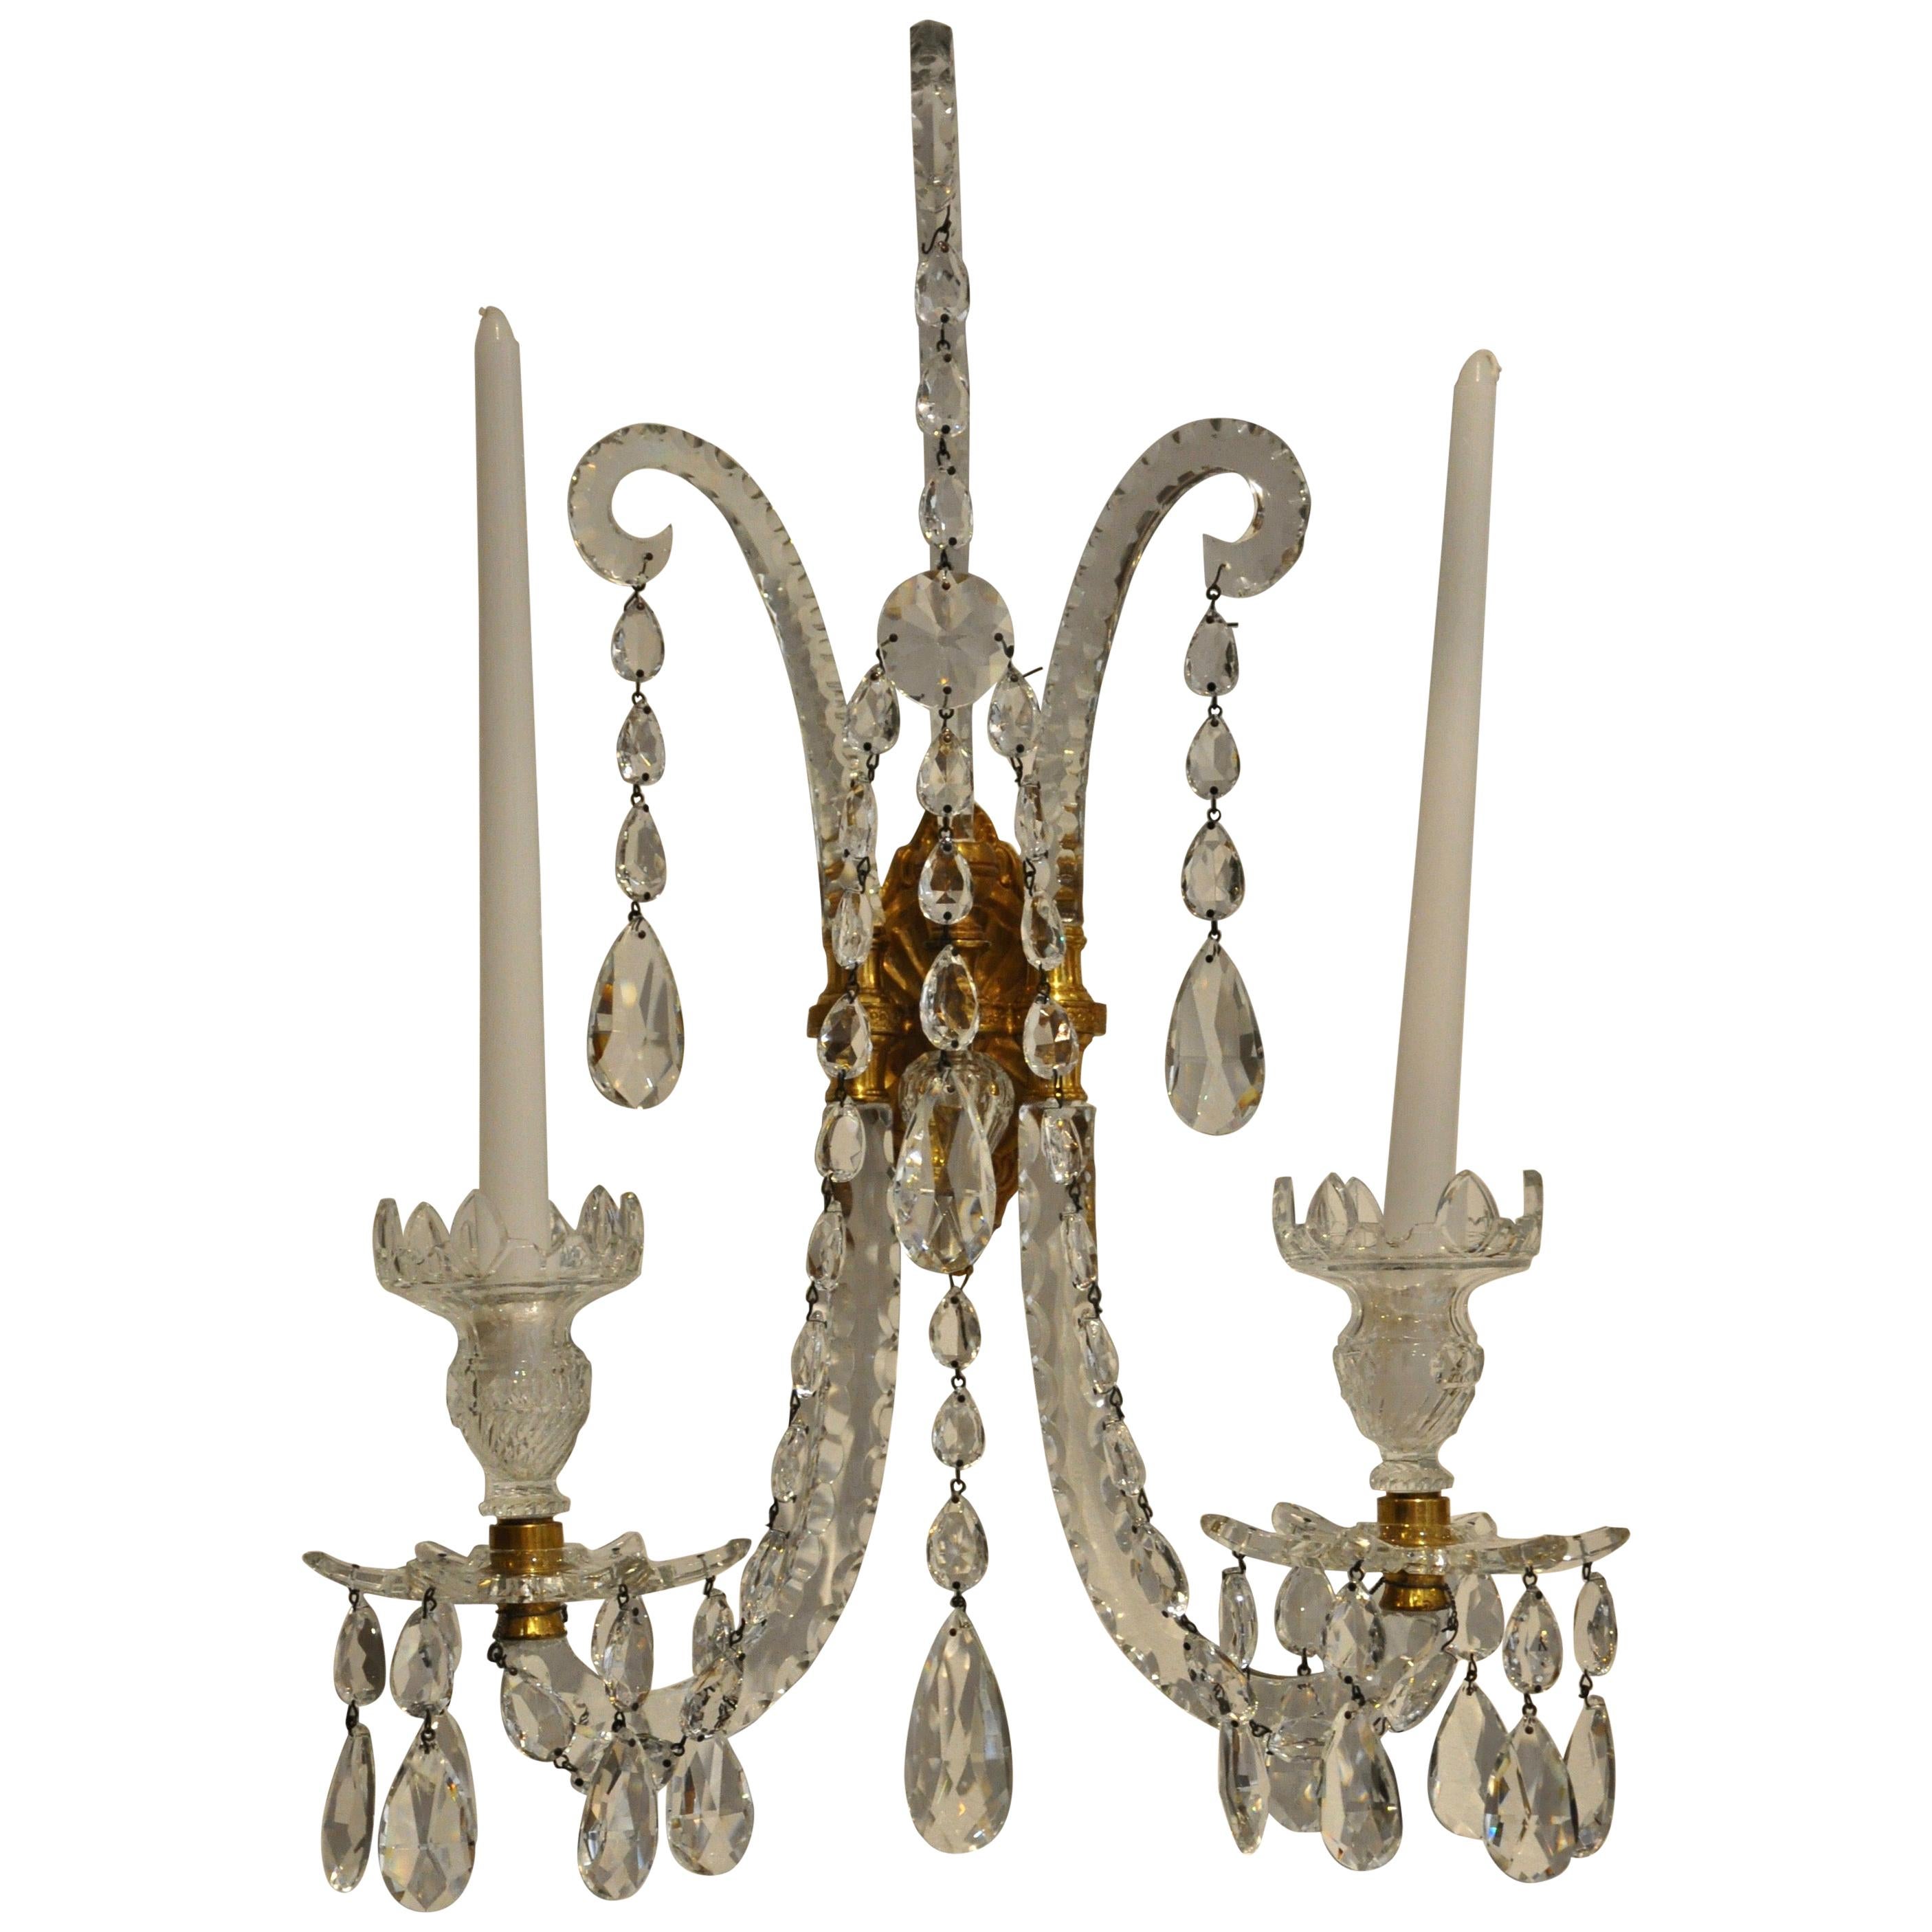 Set of four Georgian sconces of gilt brass with handcut crystal arms and features

--Wonderful set of four matching Georgian two light wall sconces
--possible retailed by Nesle, NY

--can be French wired at customer's request.